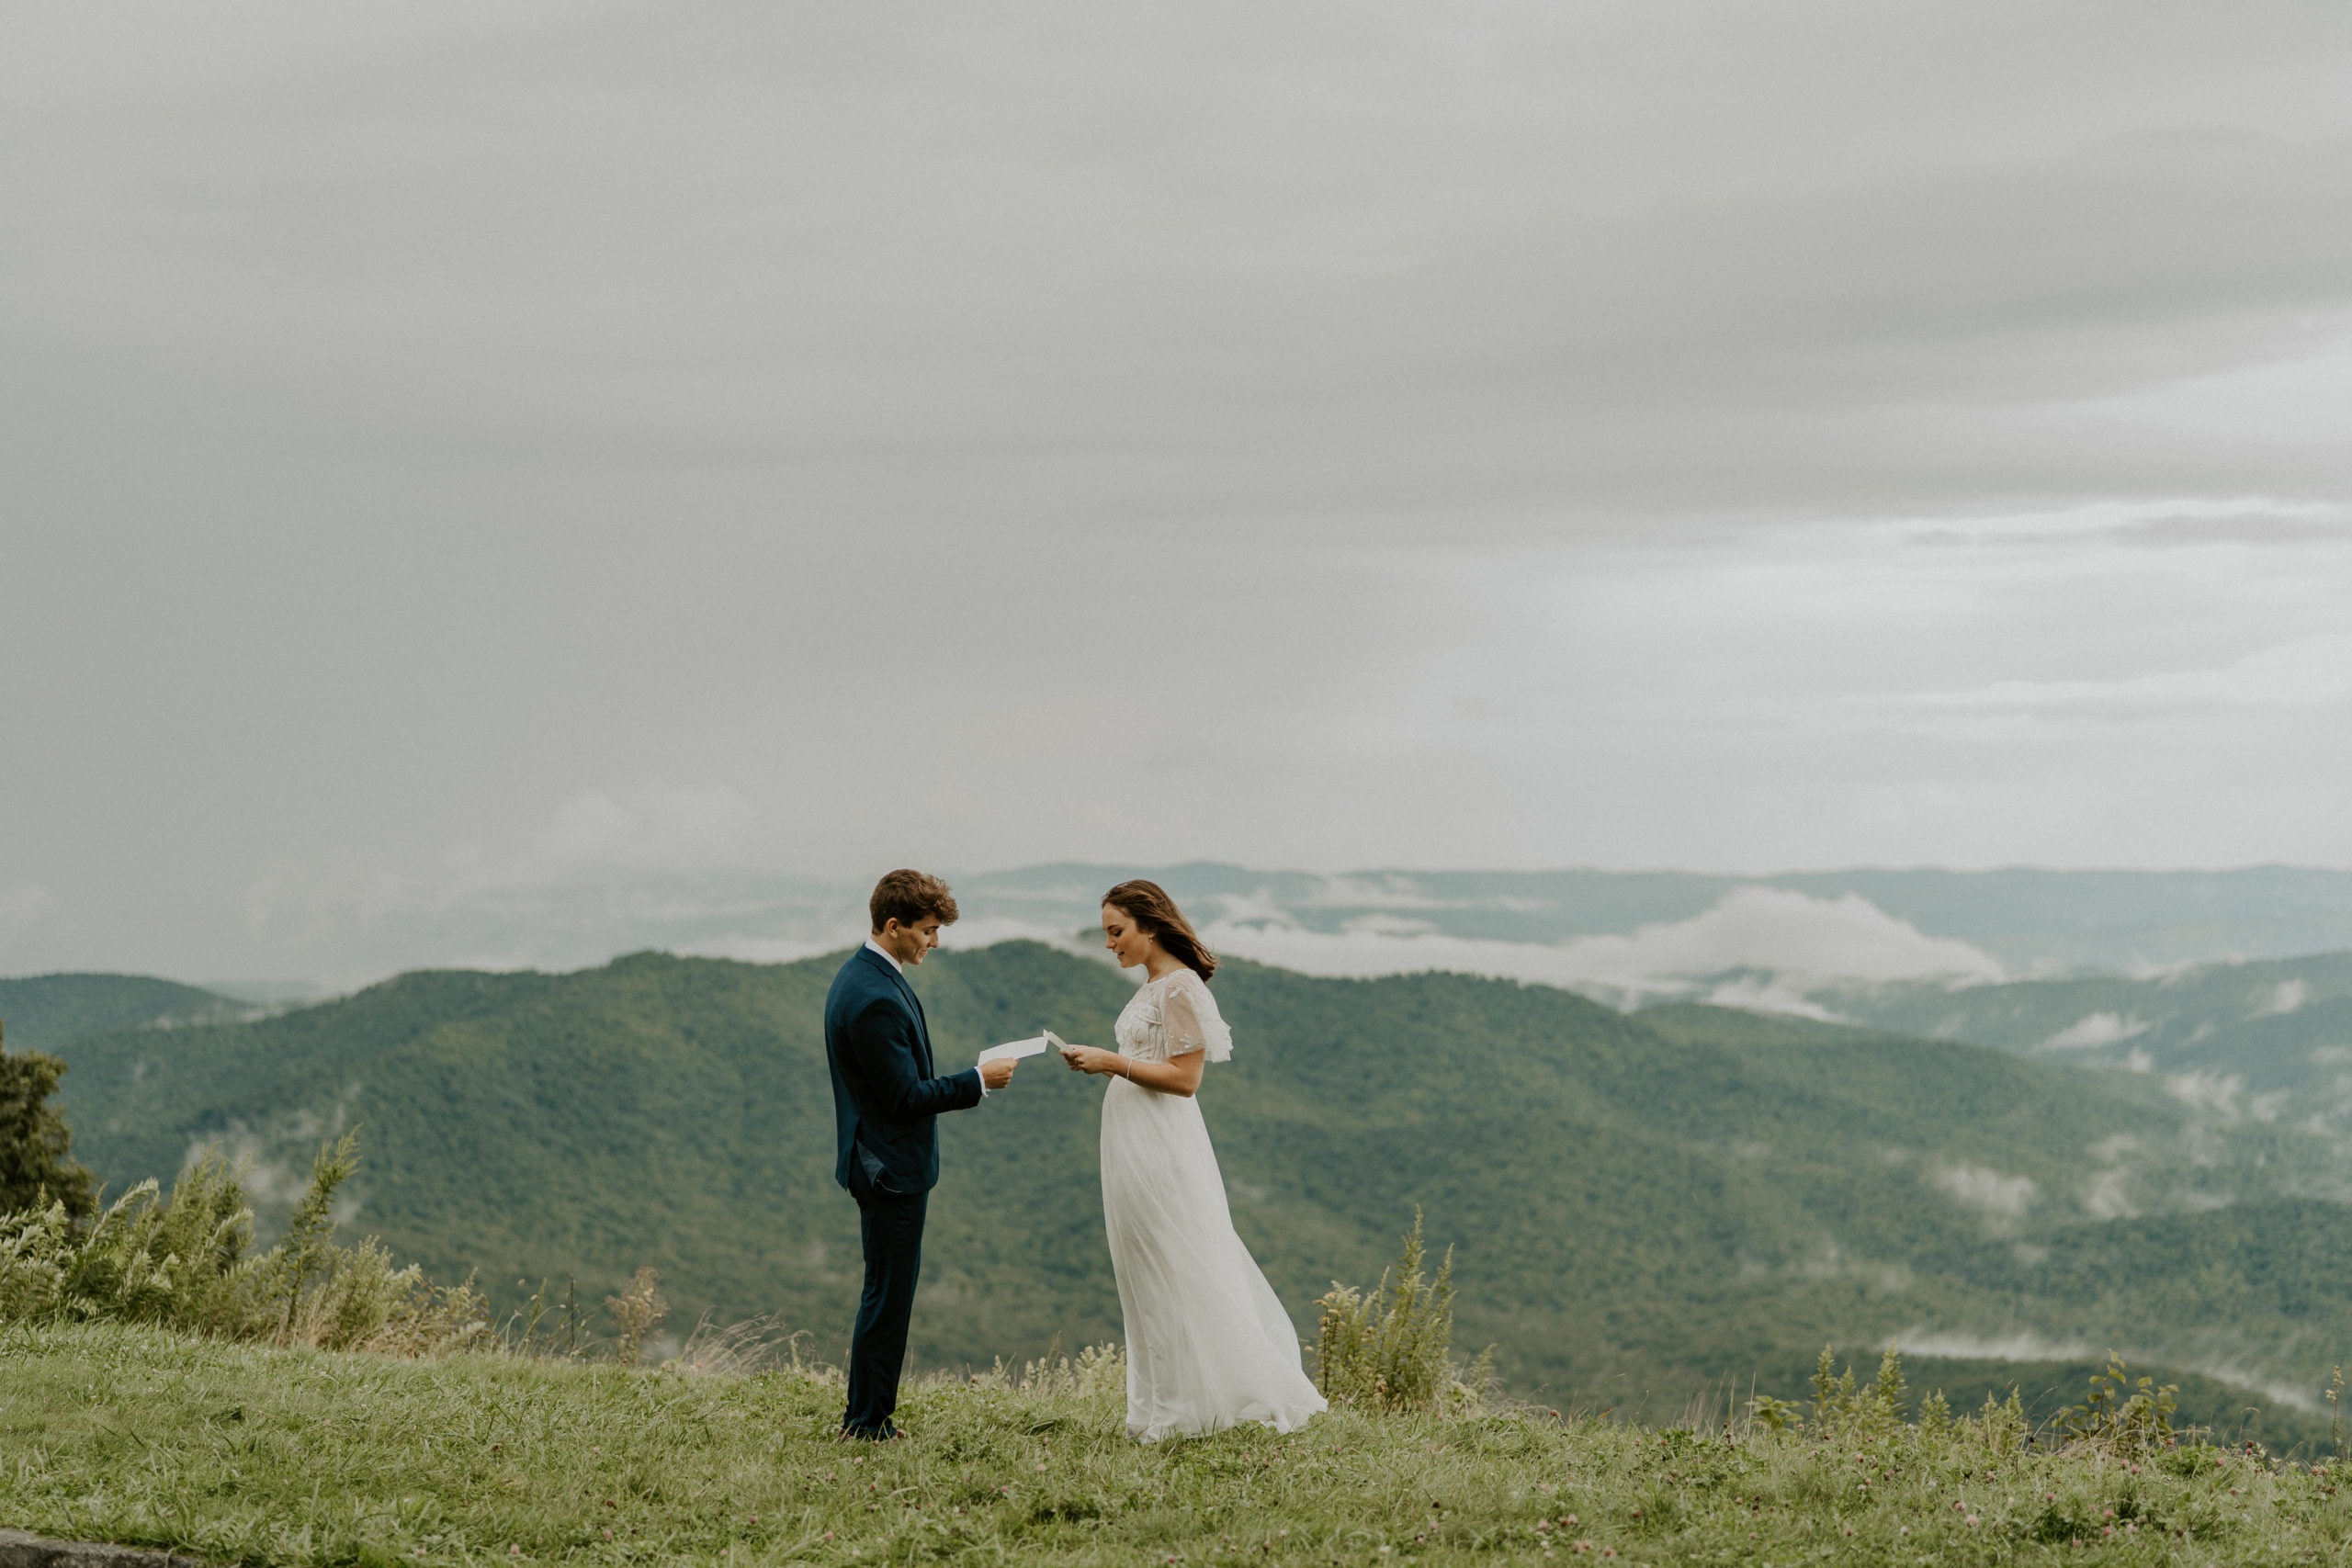 a man and woman exchanging vows with the Blue Ridge mountains in the background, they are facing each other and she is wearing a white wedding dress and he is in a blue suit.